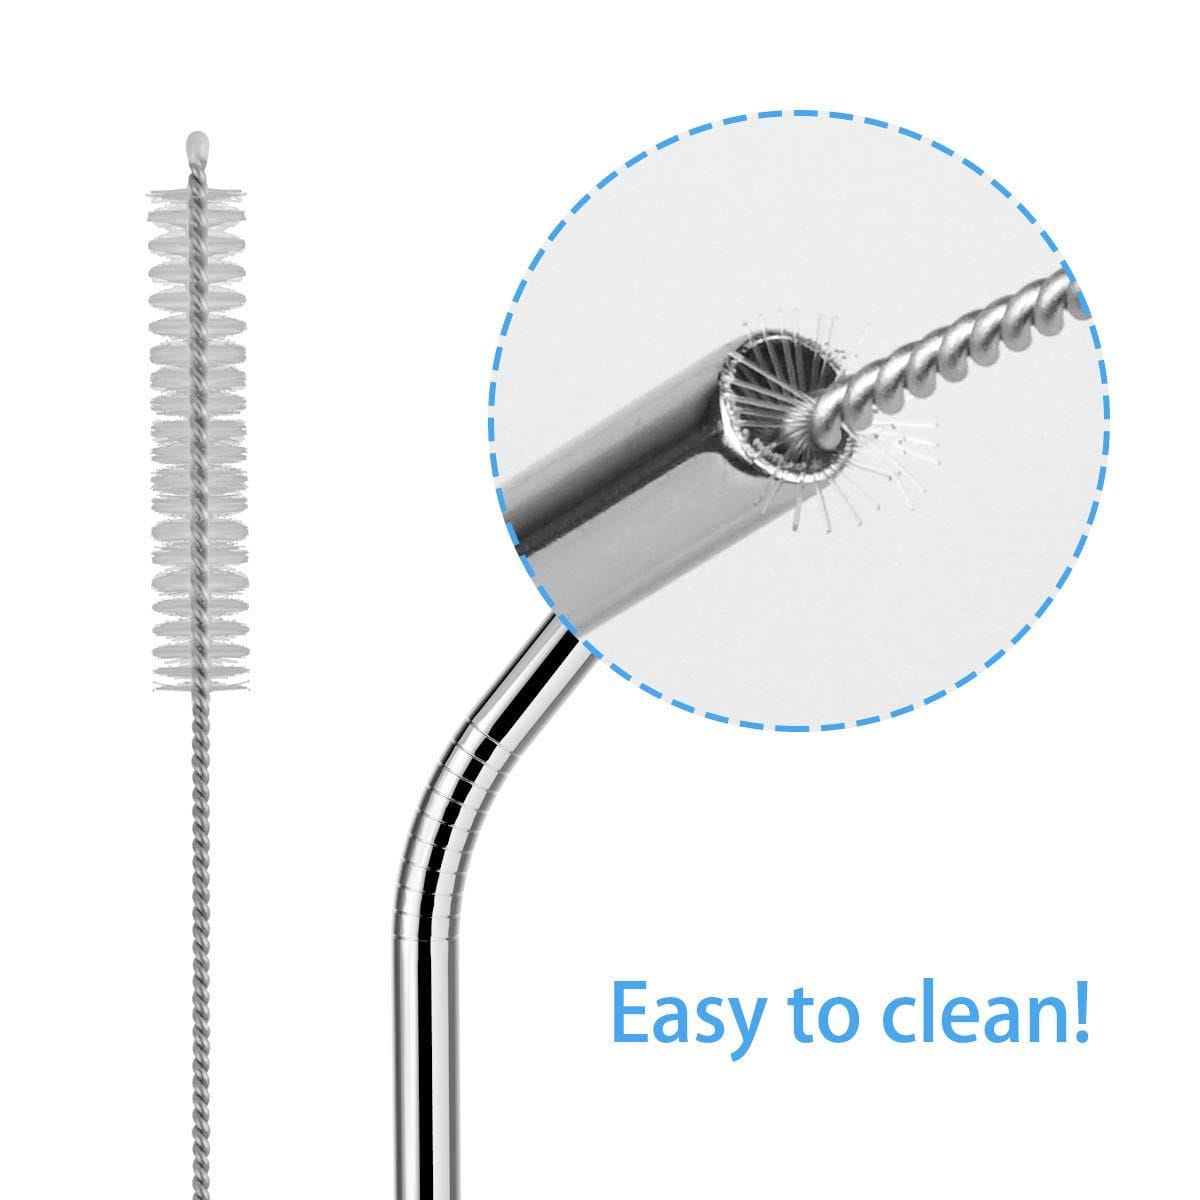 Stainless Steel Drinking Straws Set of 5 Free Cleaning Brush Included